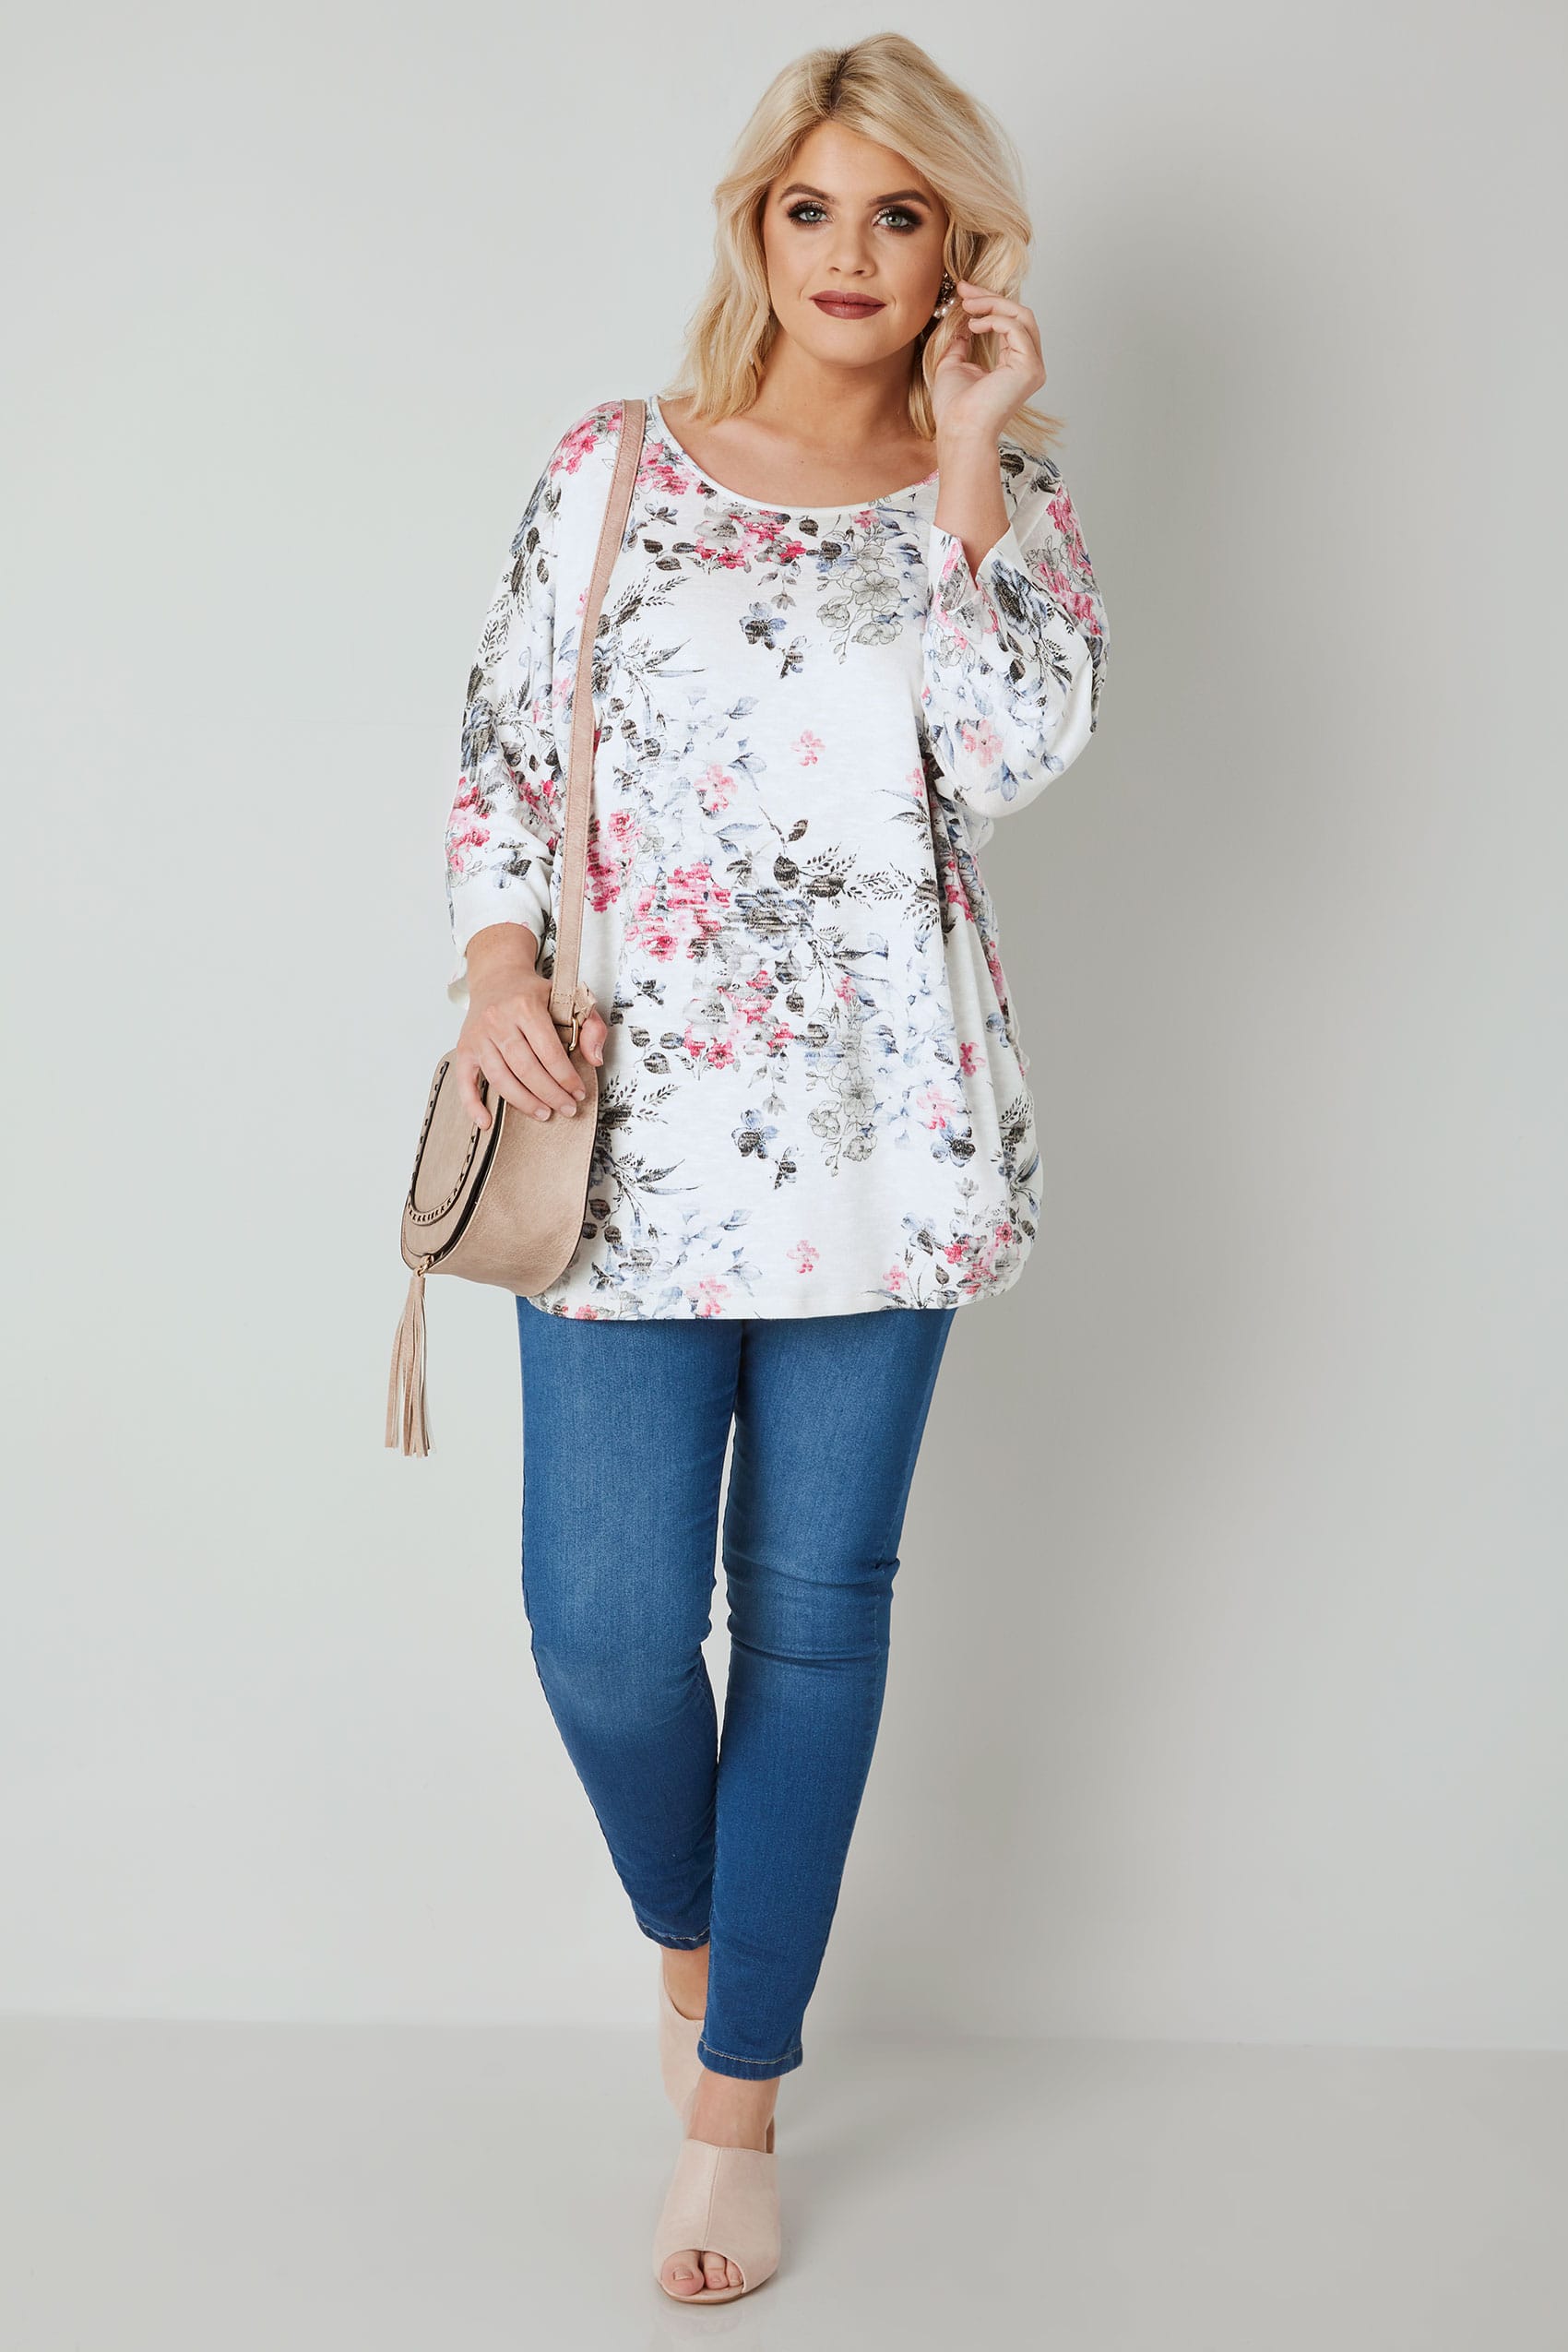 White & Multi Floral Print Top With Ruched Sides, plus size 16 to 36